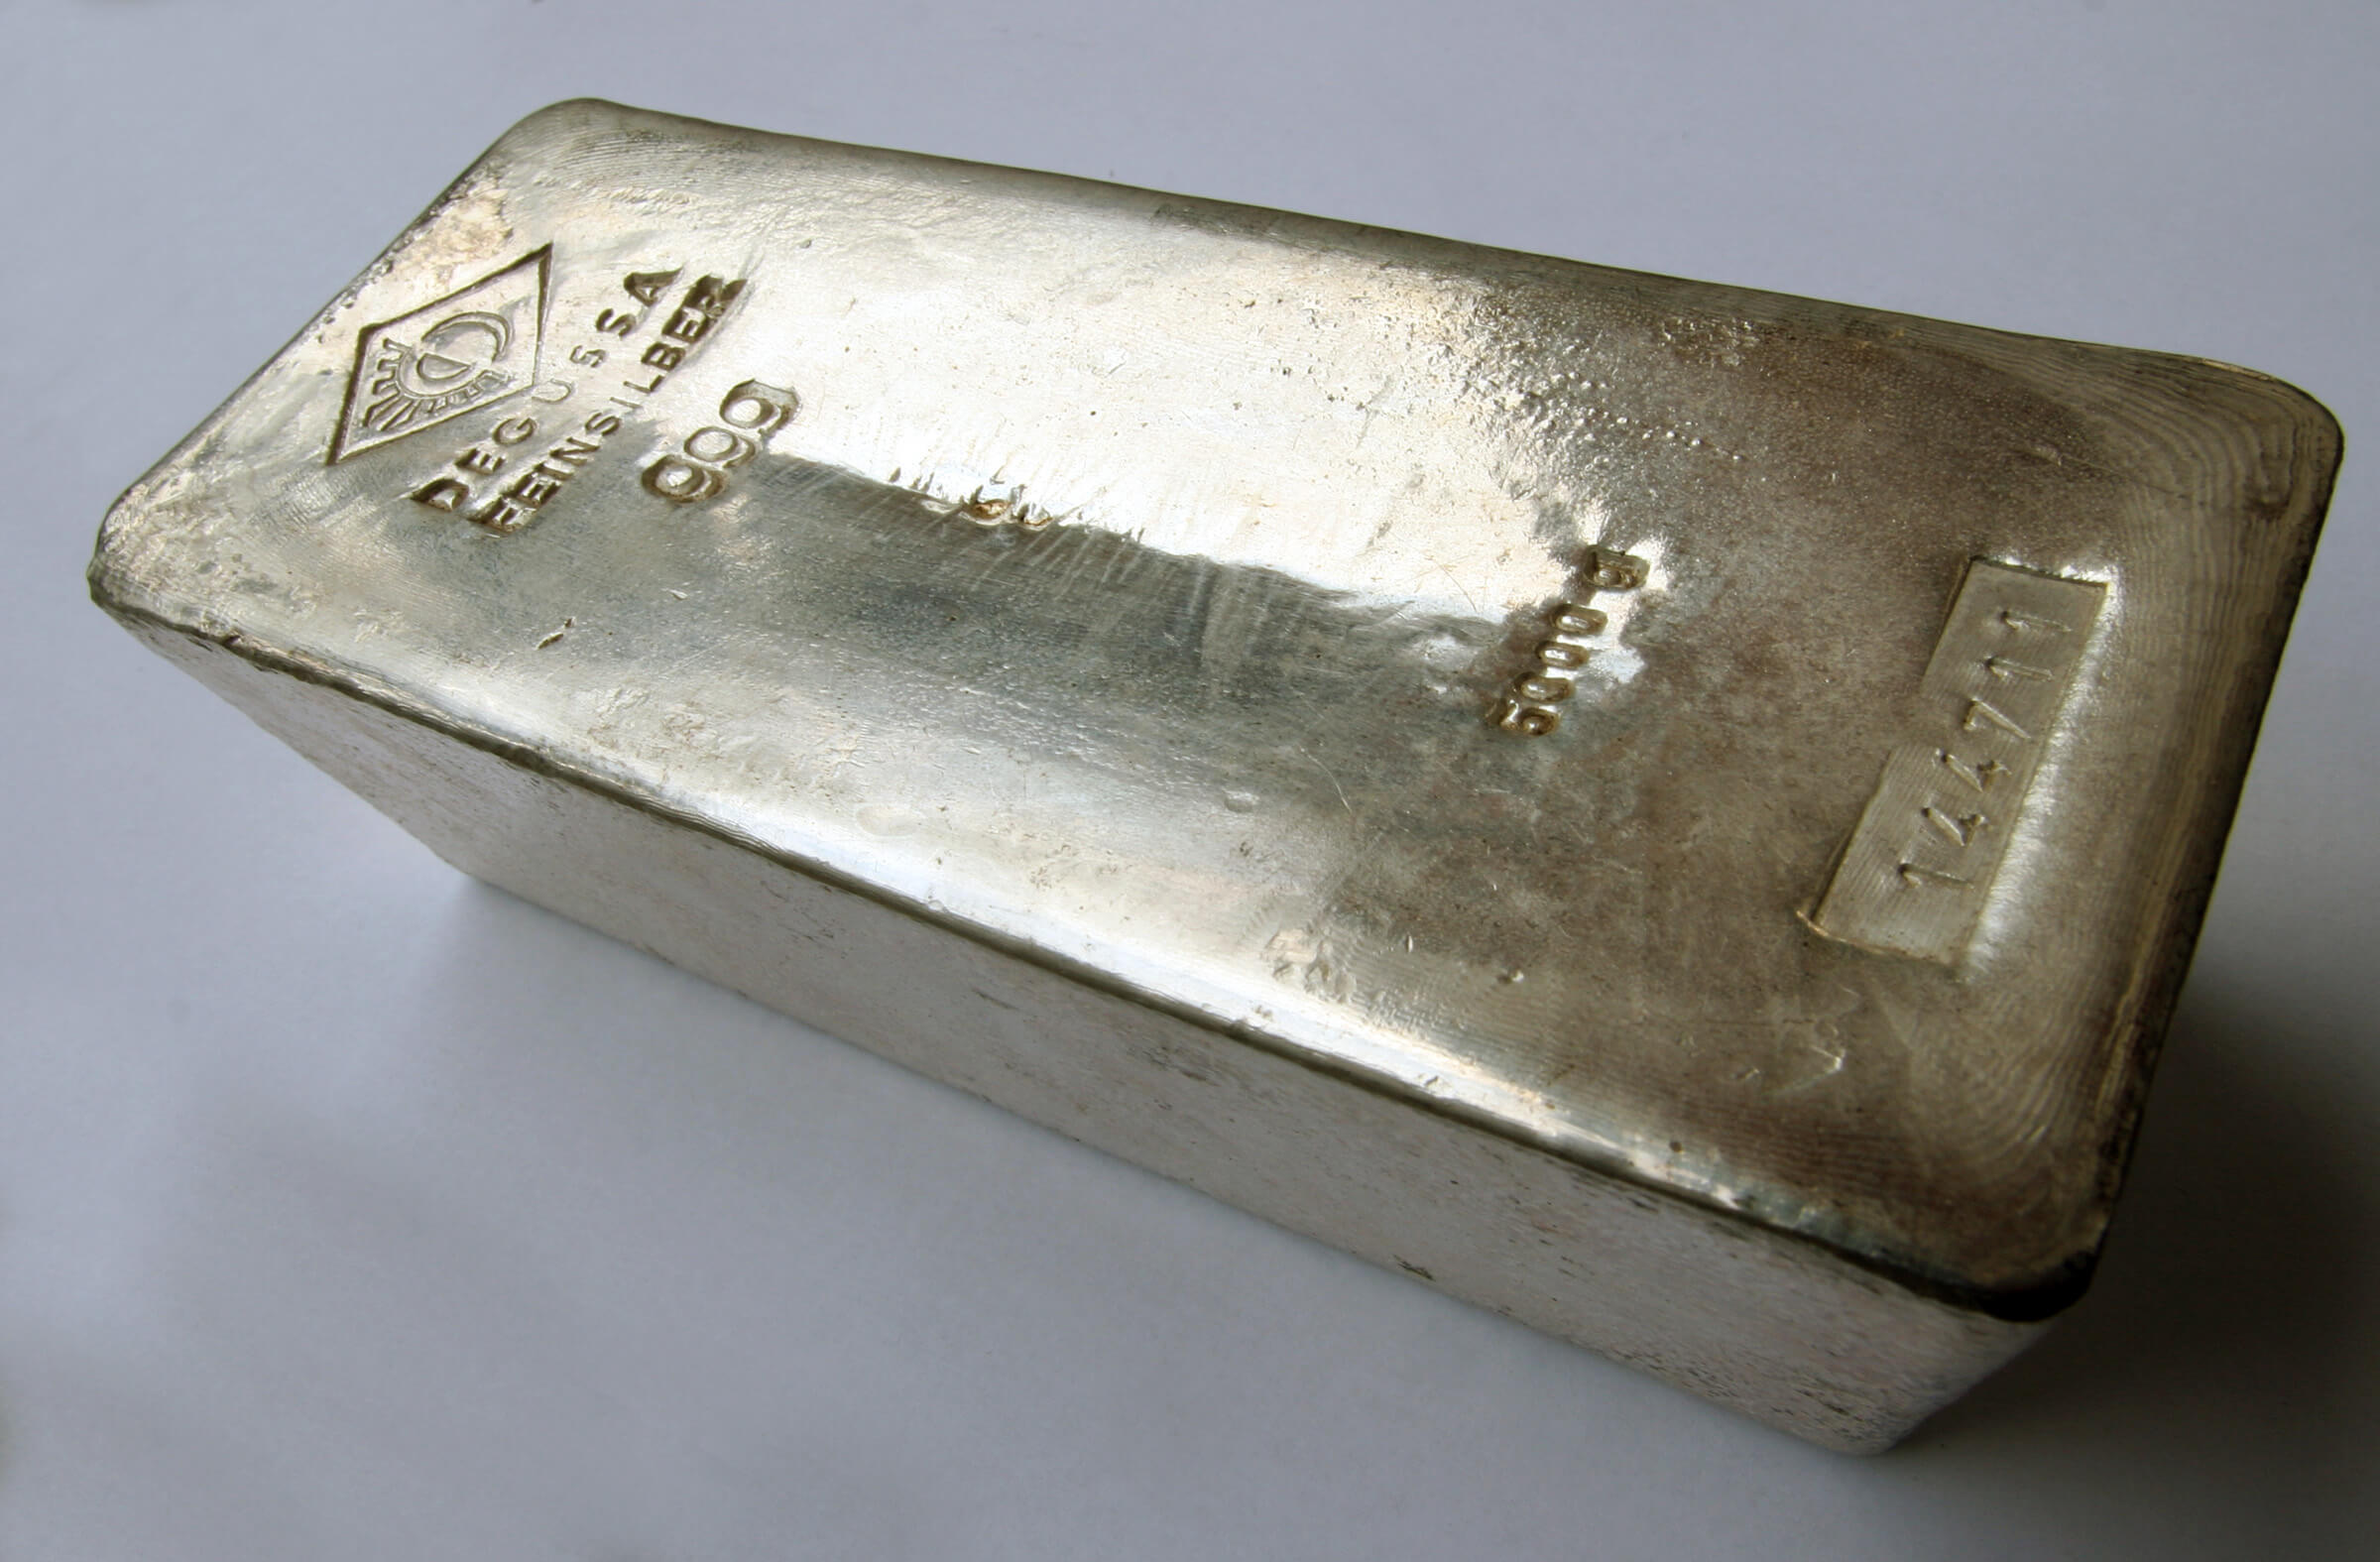 Silver Bar Buyer's Guide: How & Where to Buy Silver Bars